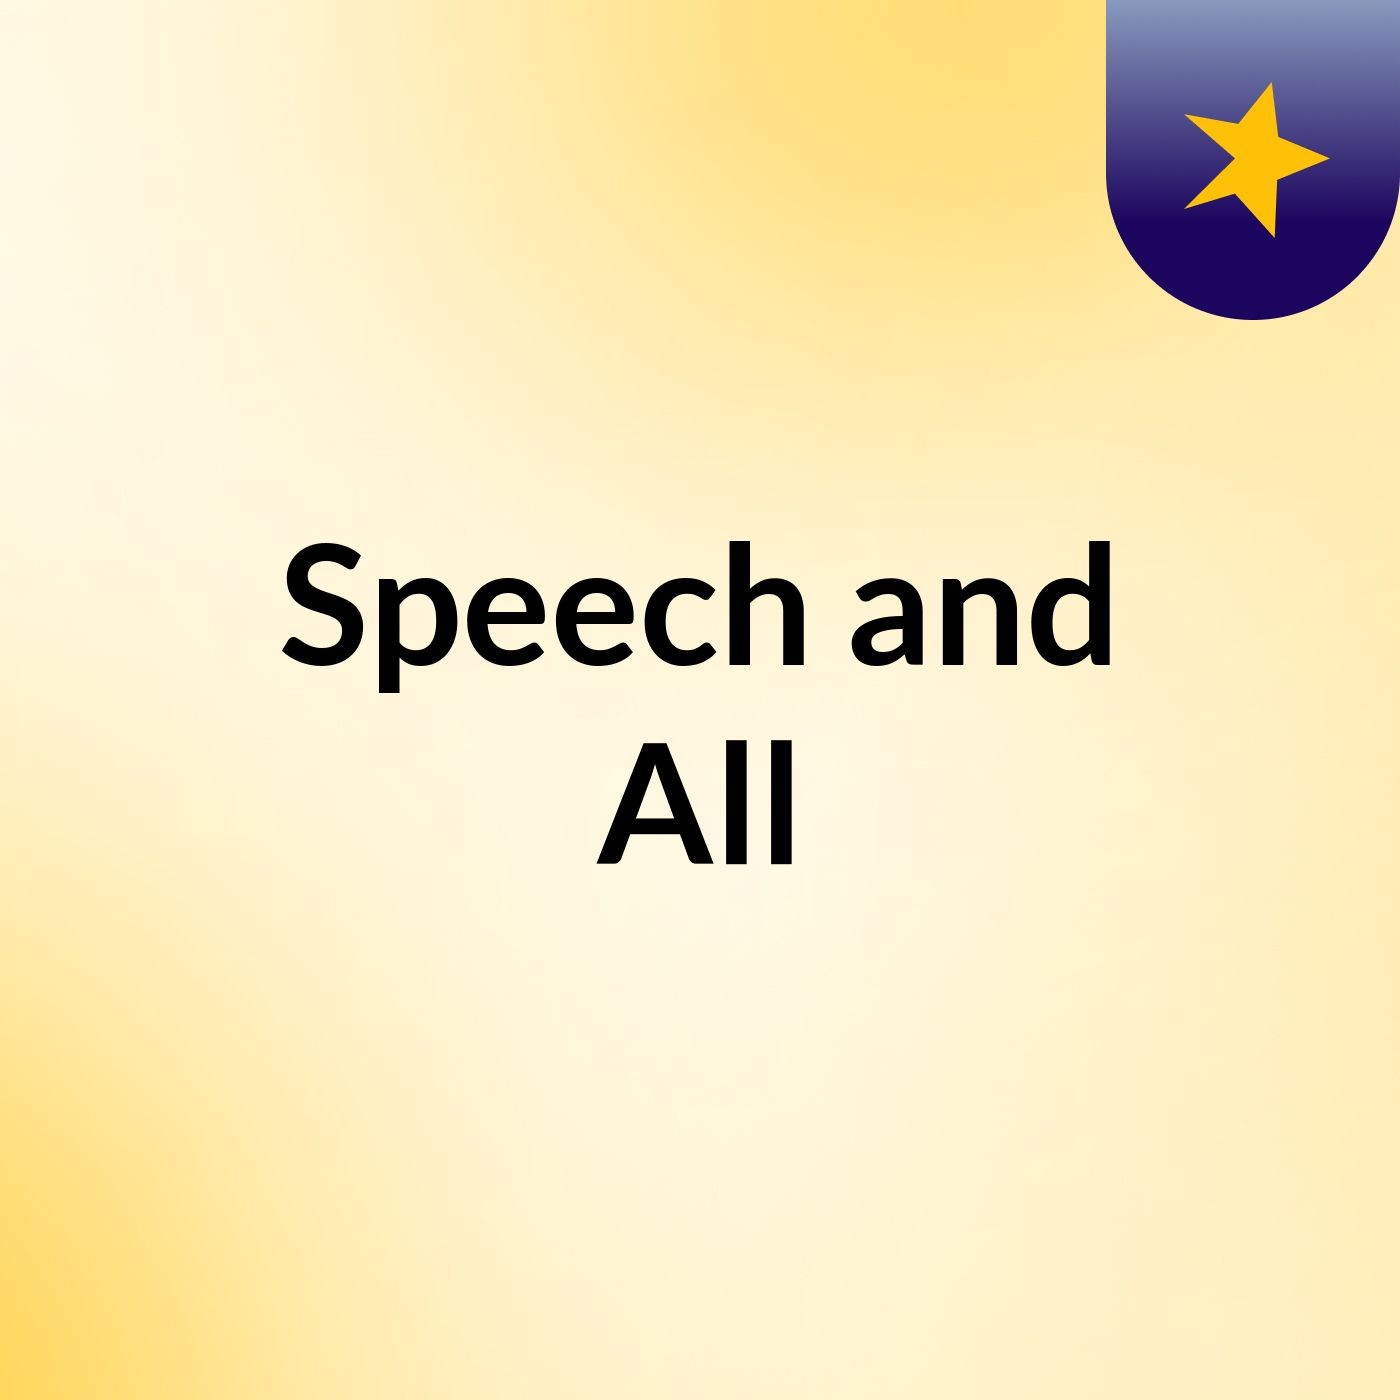 Speech and All